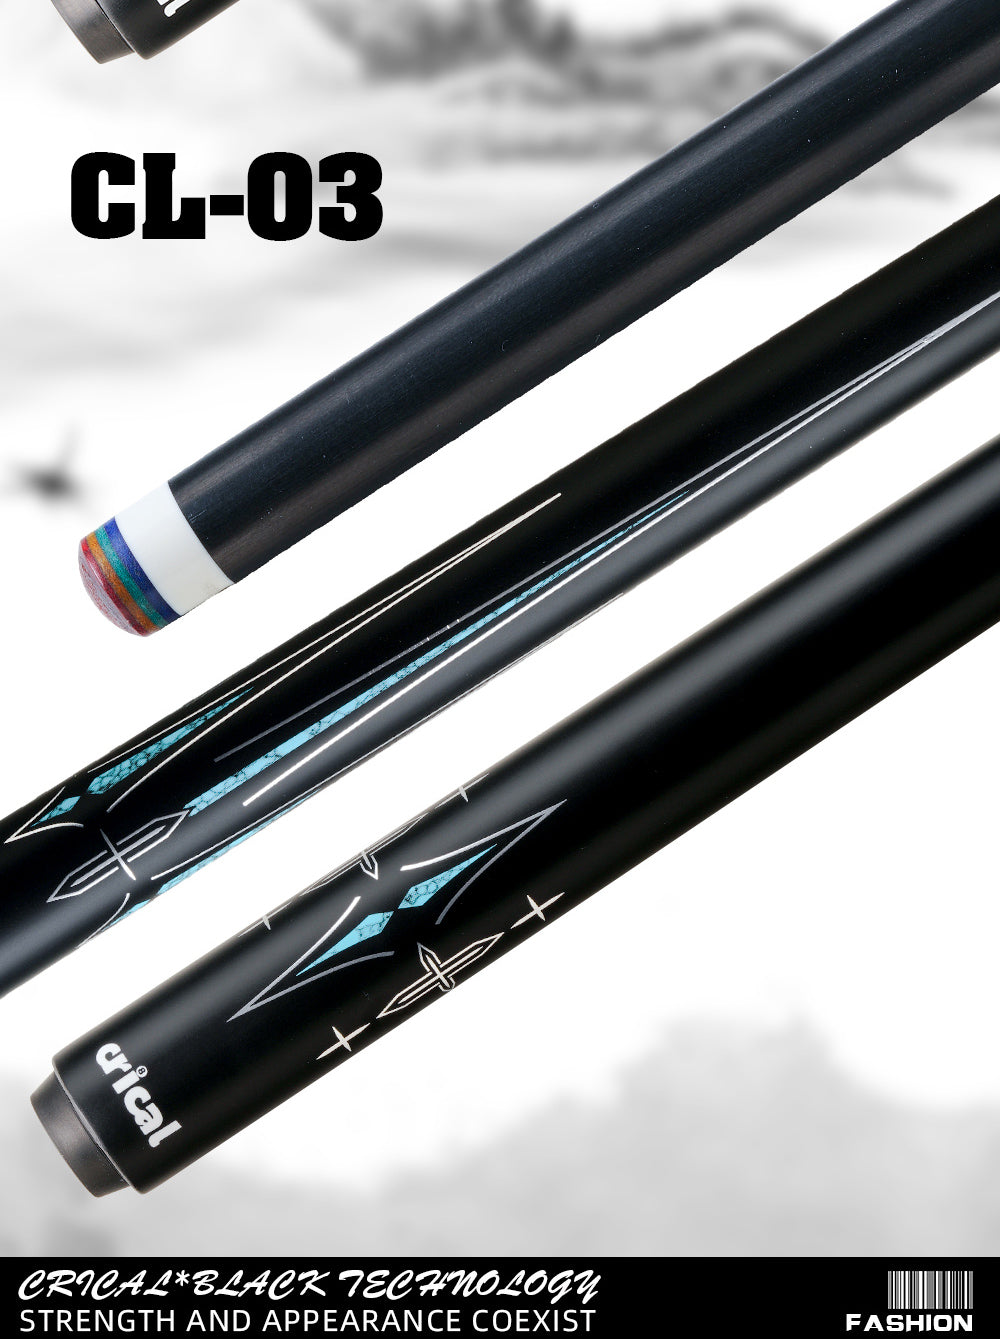 CRICAL CL-02/03 Carbon Fiber Pool Cue Stick Black Technology Low Deflection 12.2mm Tip Radial Joint Professional 1/2 Billiard